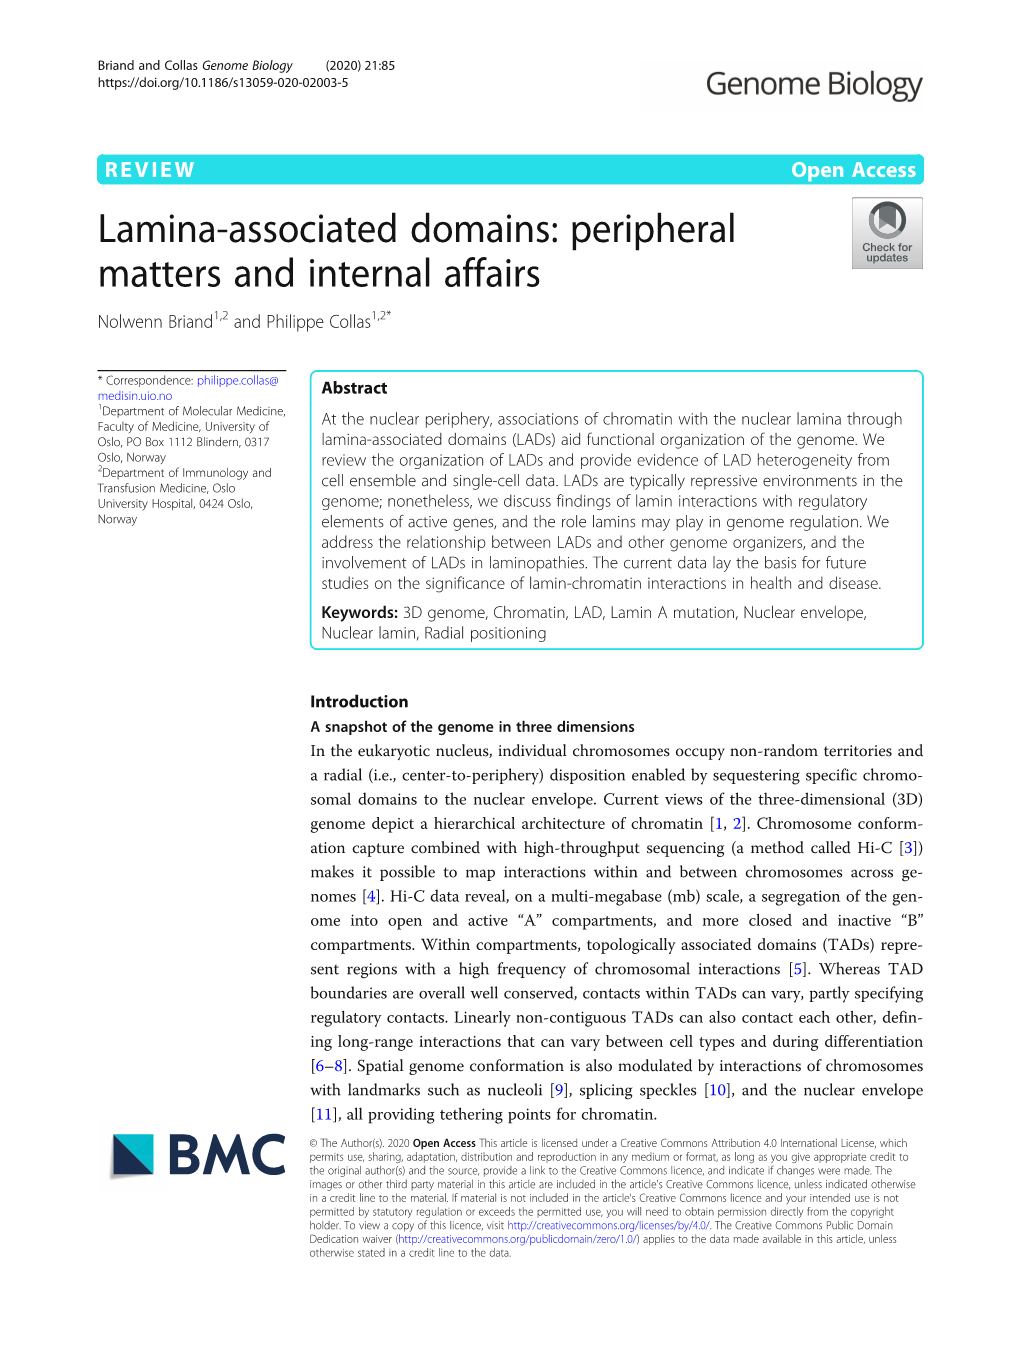 Lamina-Associated Domains: Peripheral Matters and Internal Affairs Nolwenn Briand1,2 and Philippe Collas1,2*